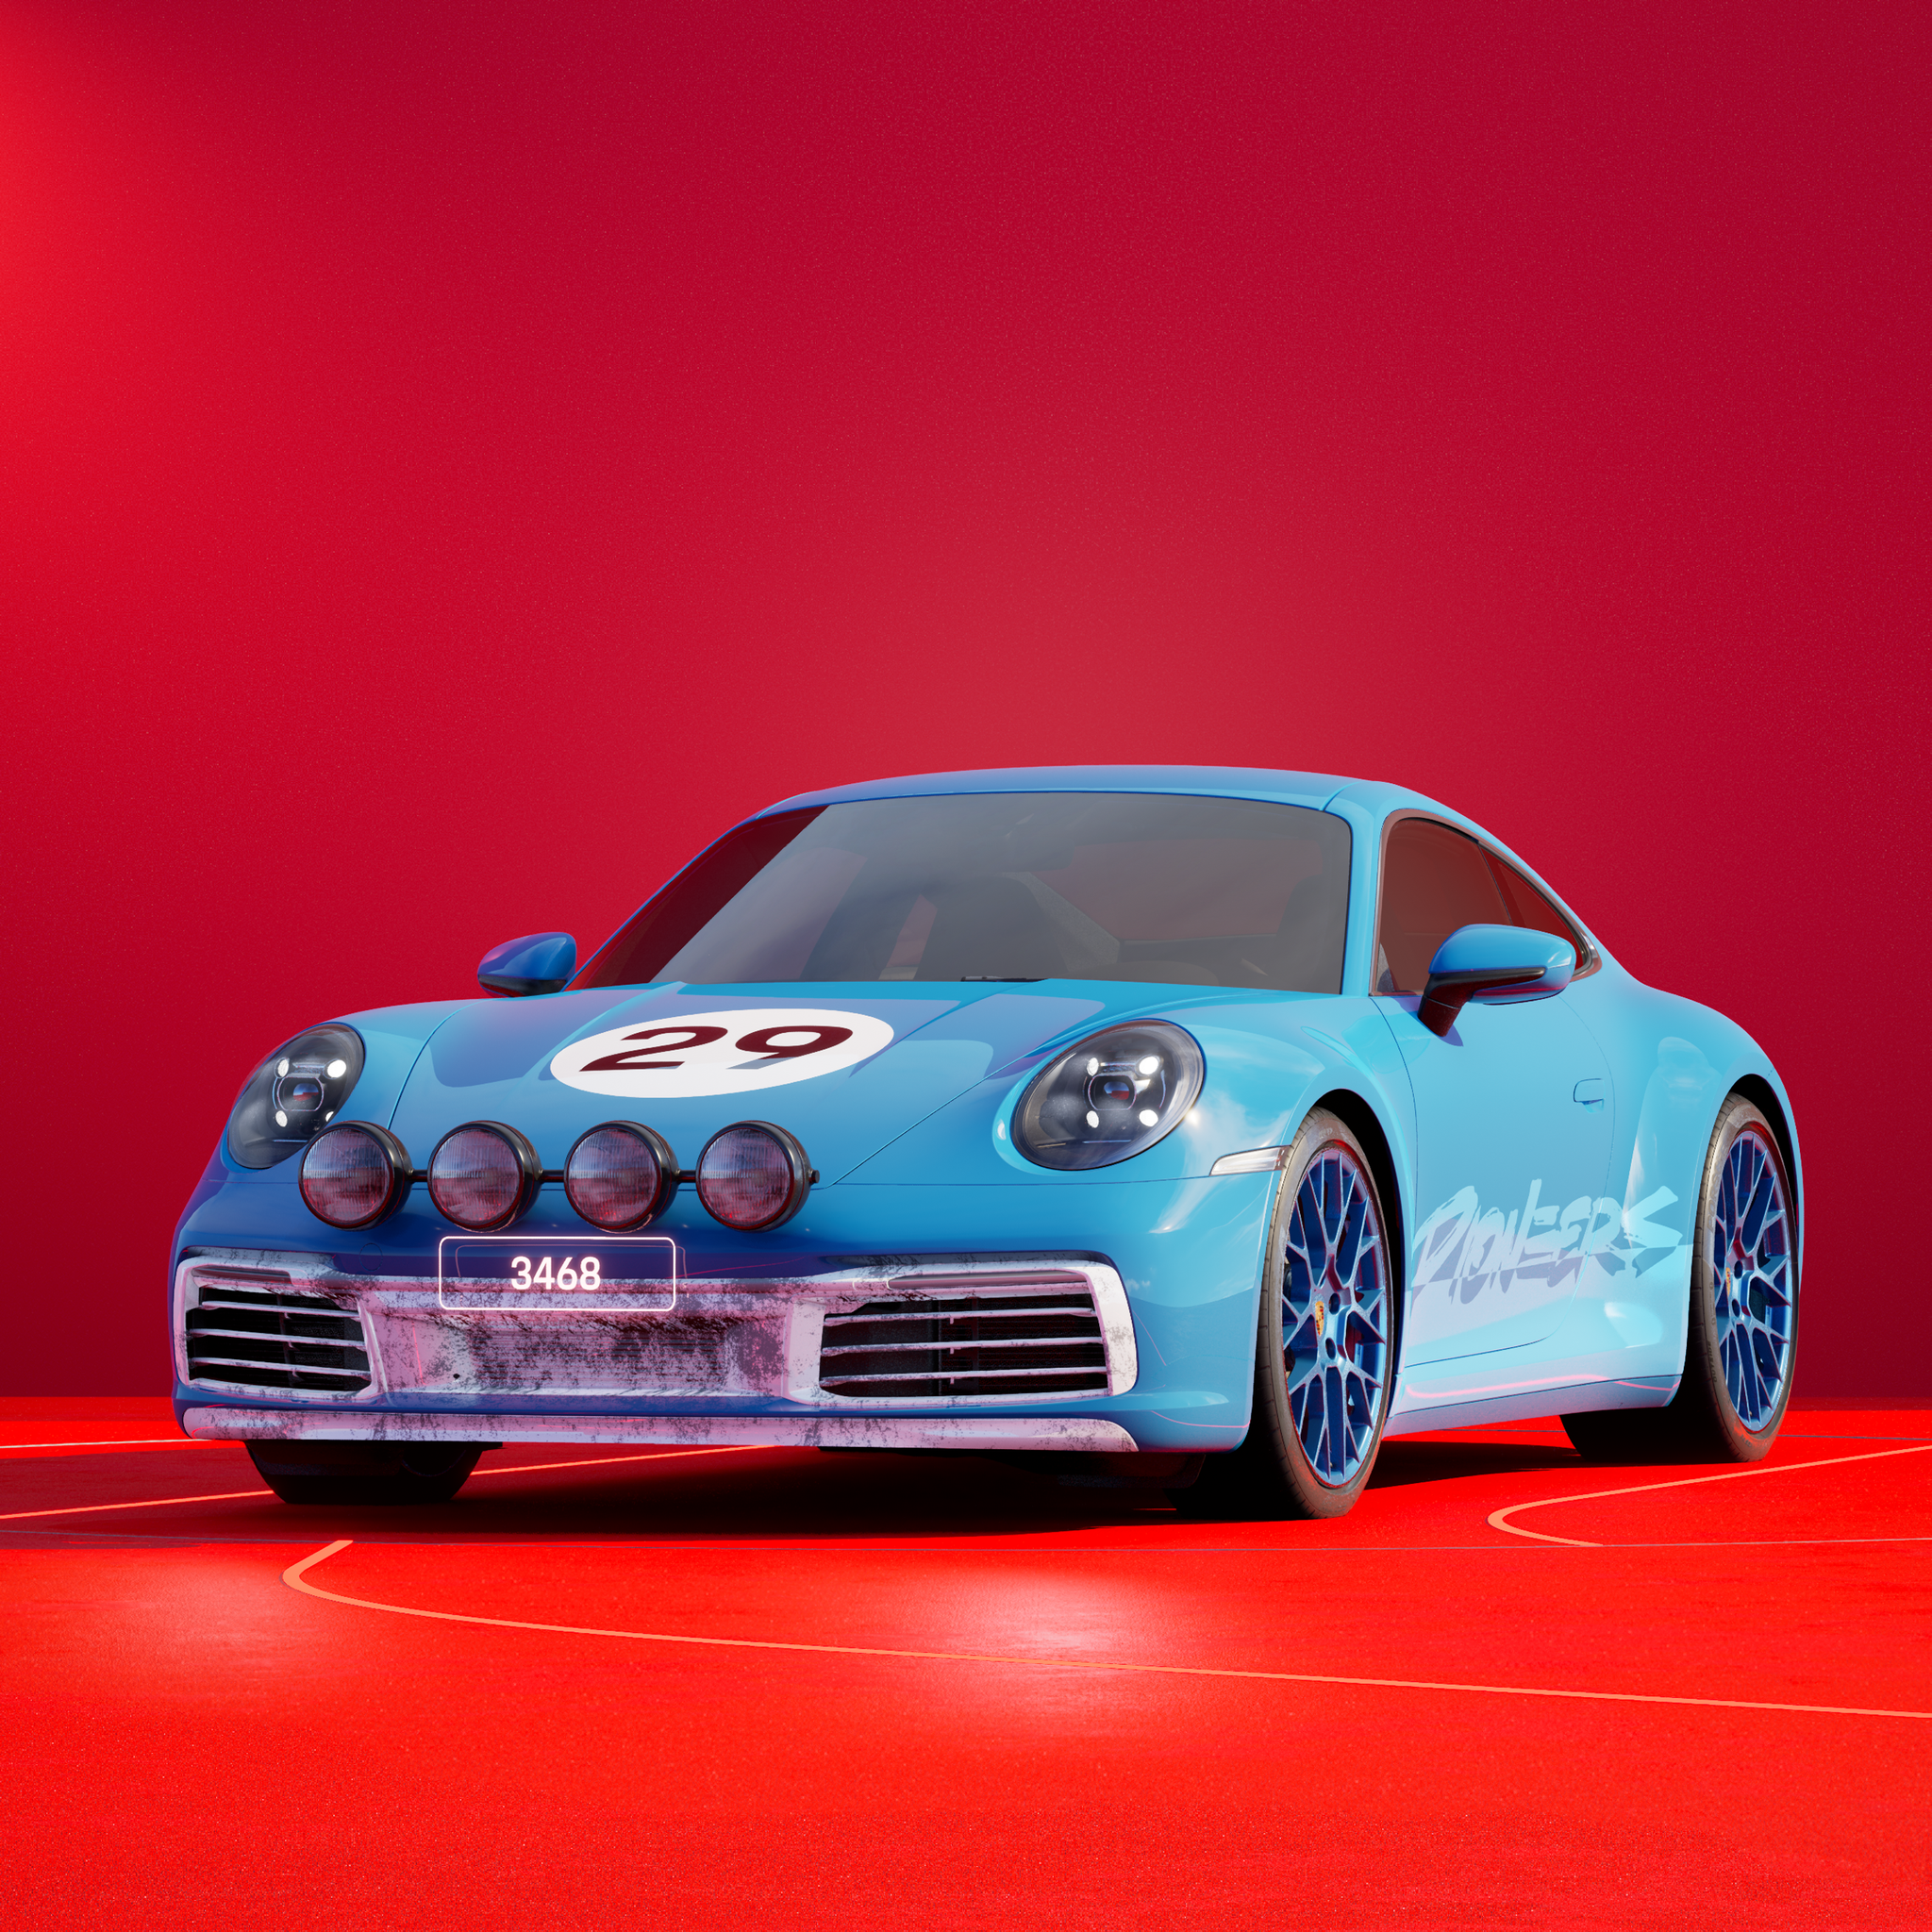 The PORSCHΞ 911 3468 image in phase